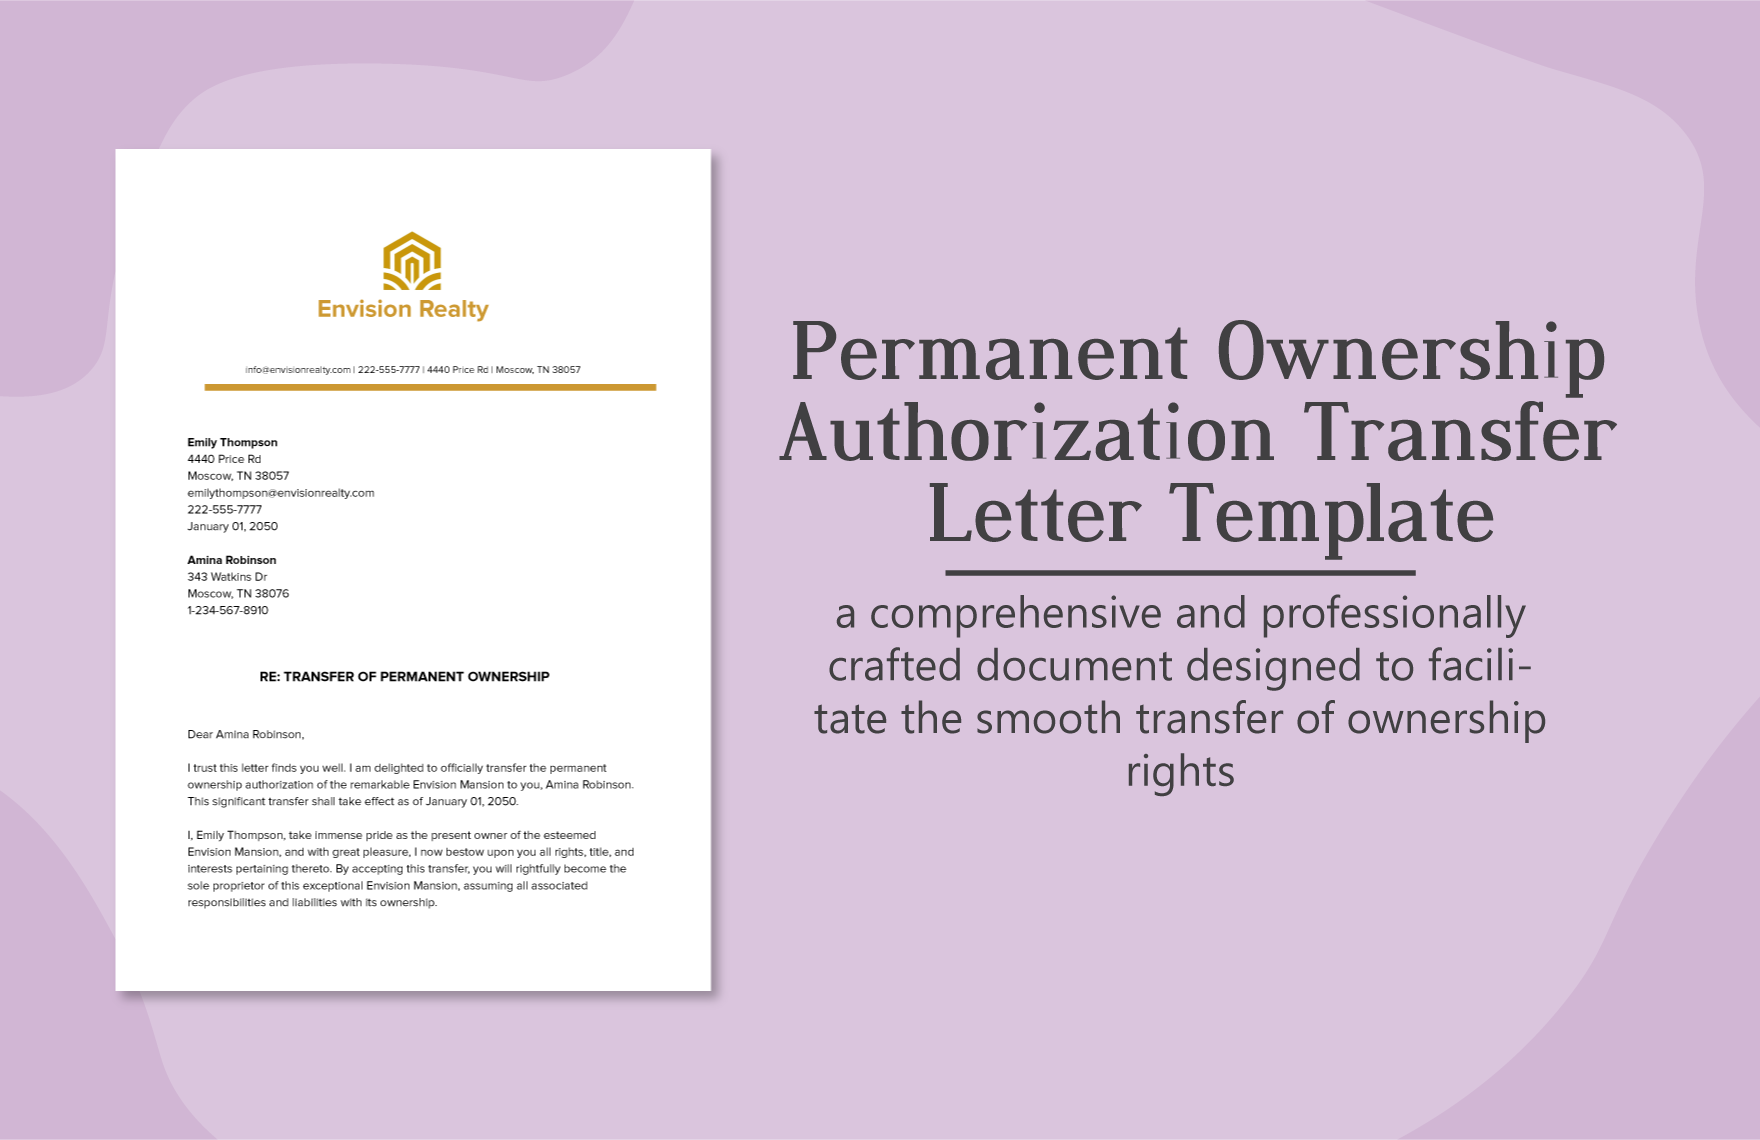 Permanent Ownership Authorization Transfer Letter Template